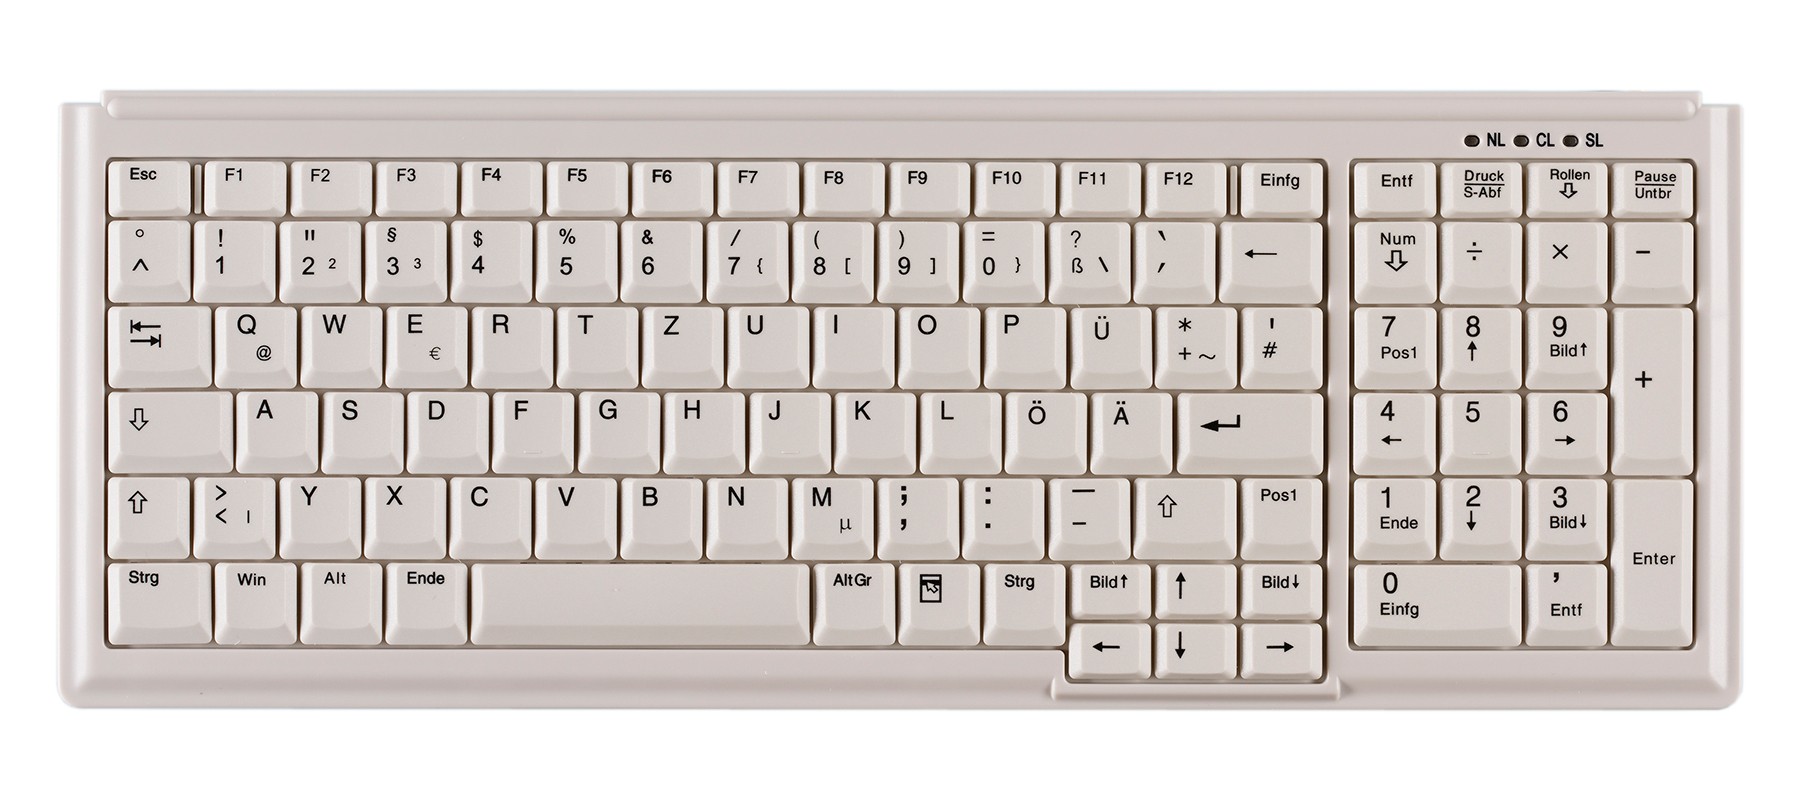 104 Key Notebook Style Keyboard with Numeric Pad, PS/2, light grey, German layout